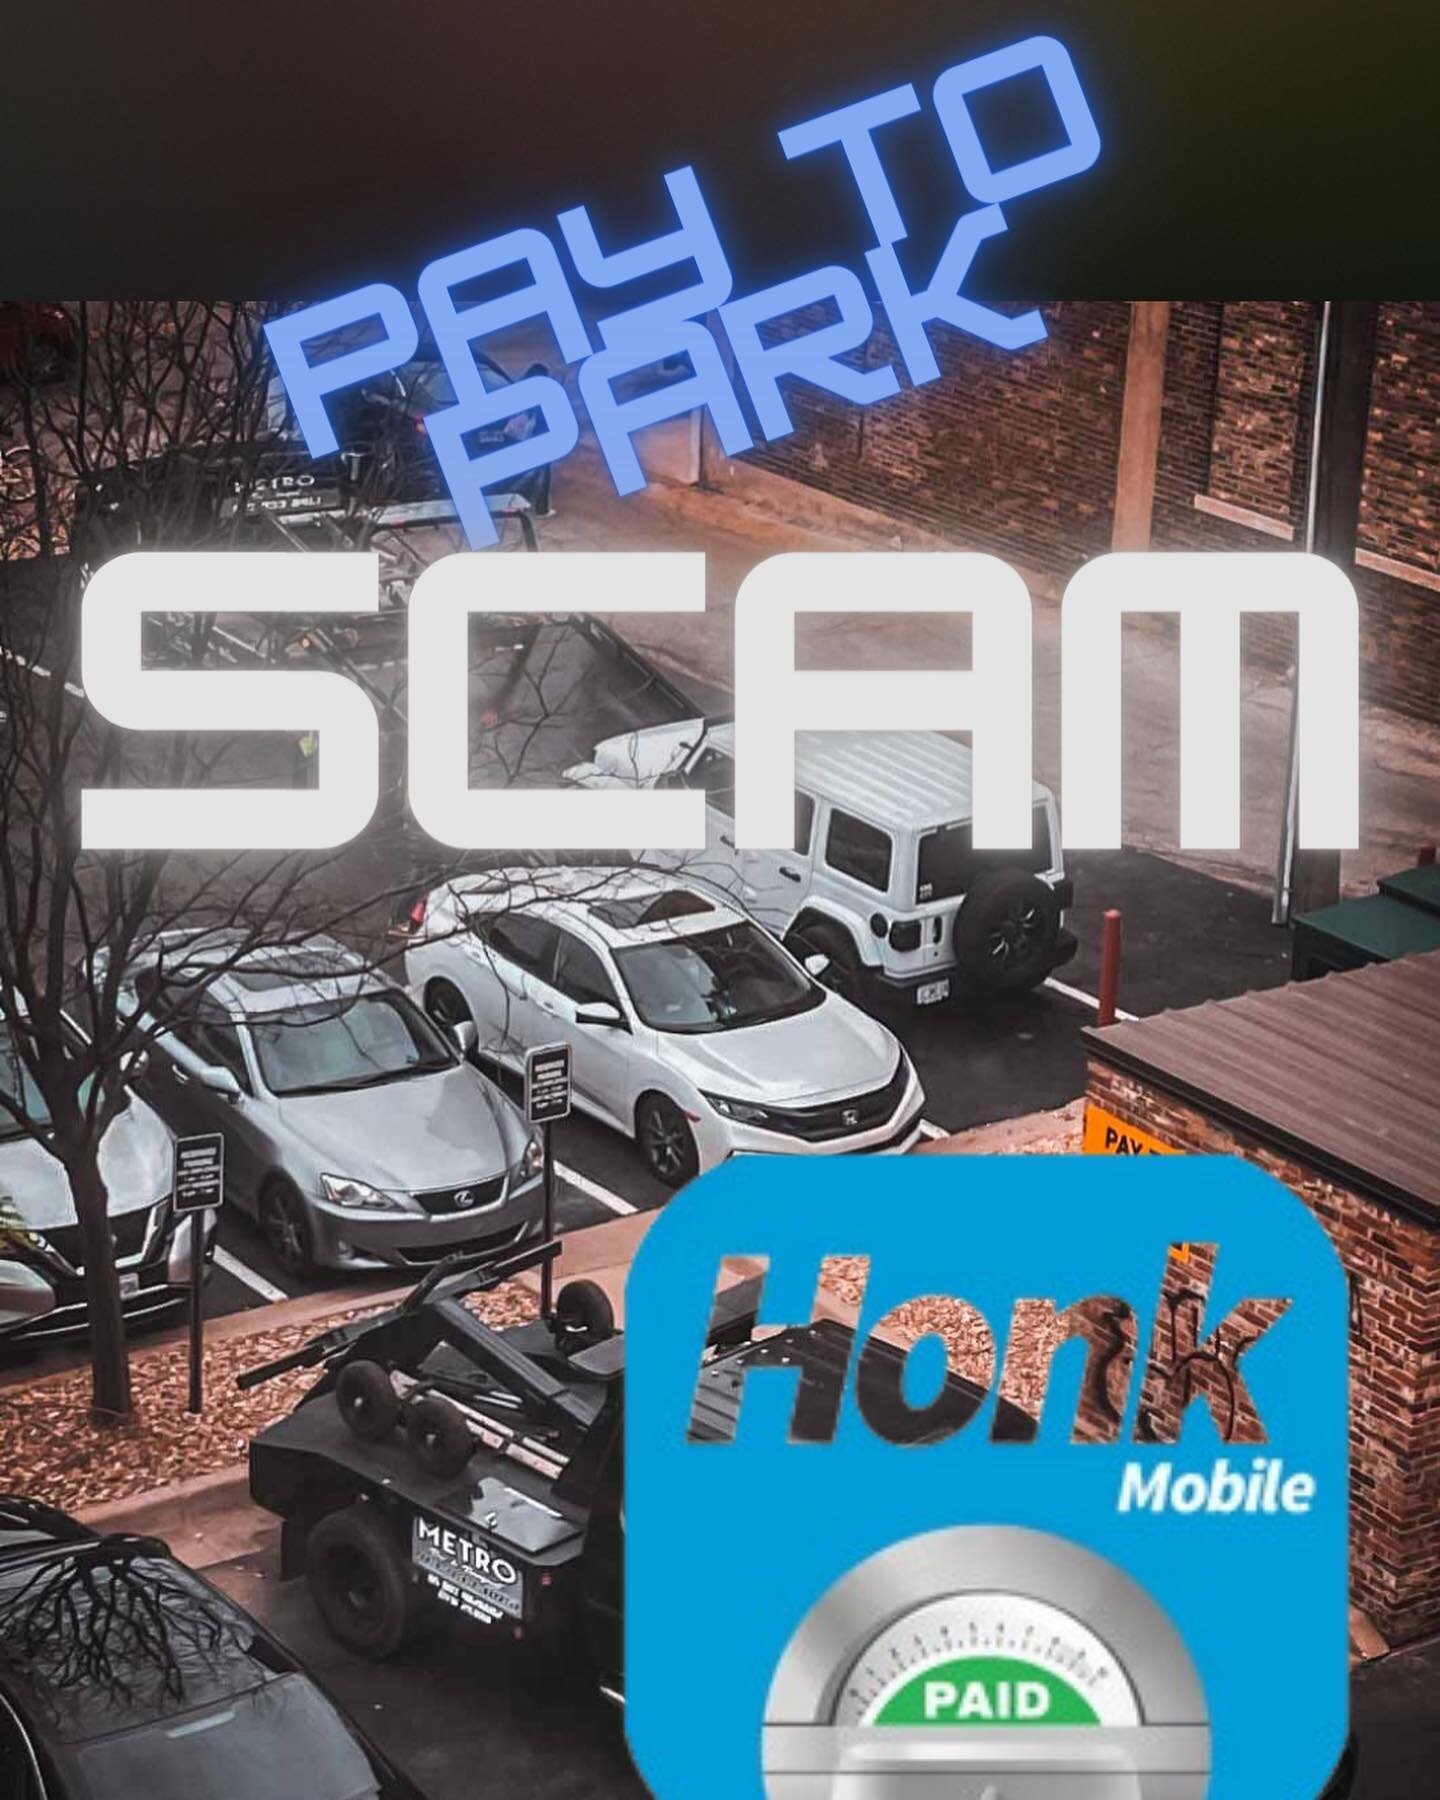 PSA&hellip;.. BEWARE of PARKING SCAM in the Crossroads district, the HONK app doesn&rsquo;t always select current time for parking and starts running the countdown timer making you think all is well, but in fact it&rsquo;s pushed the start time out (